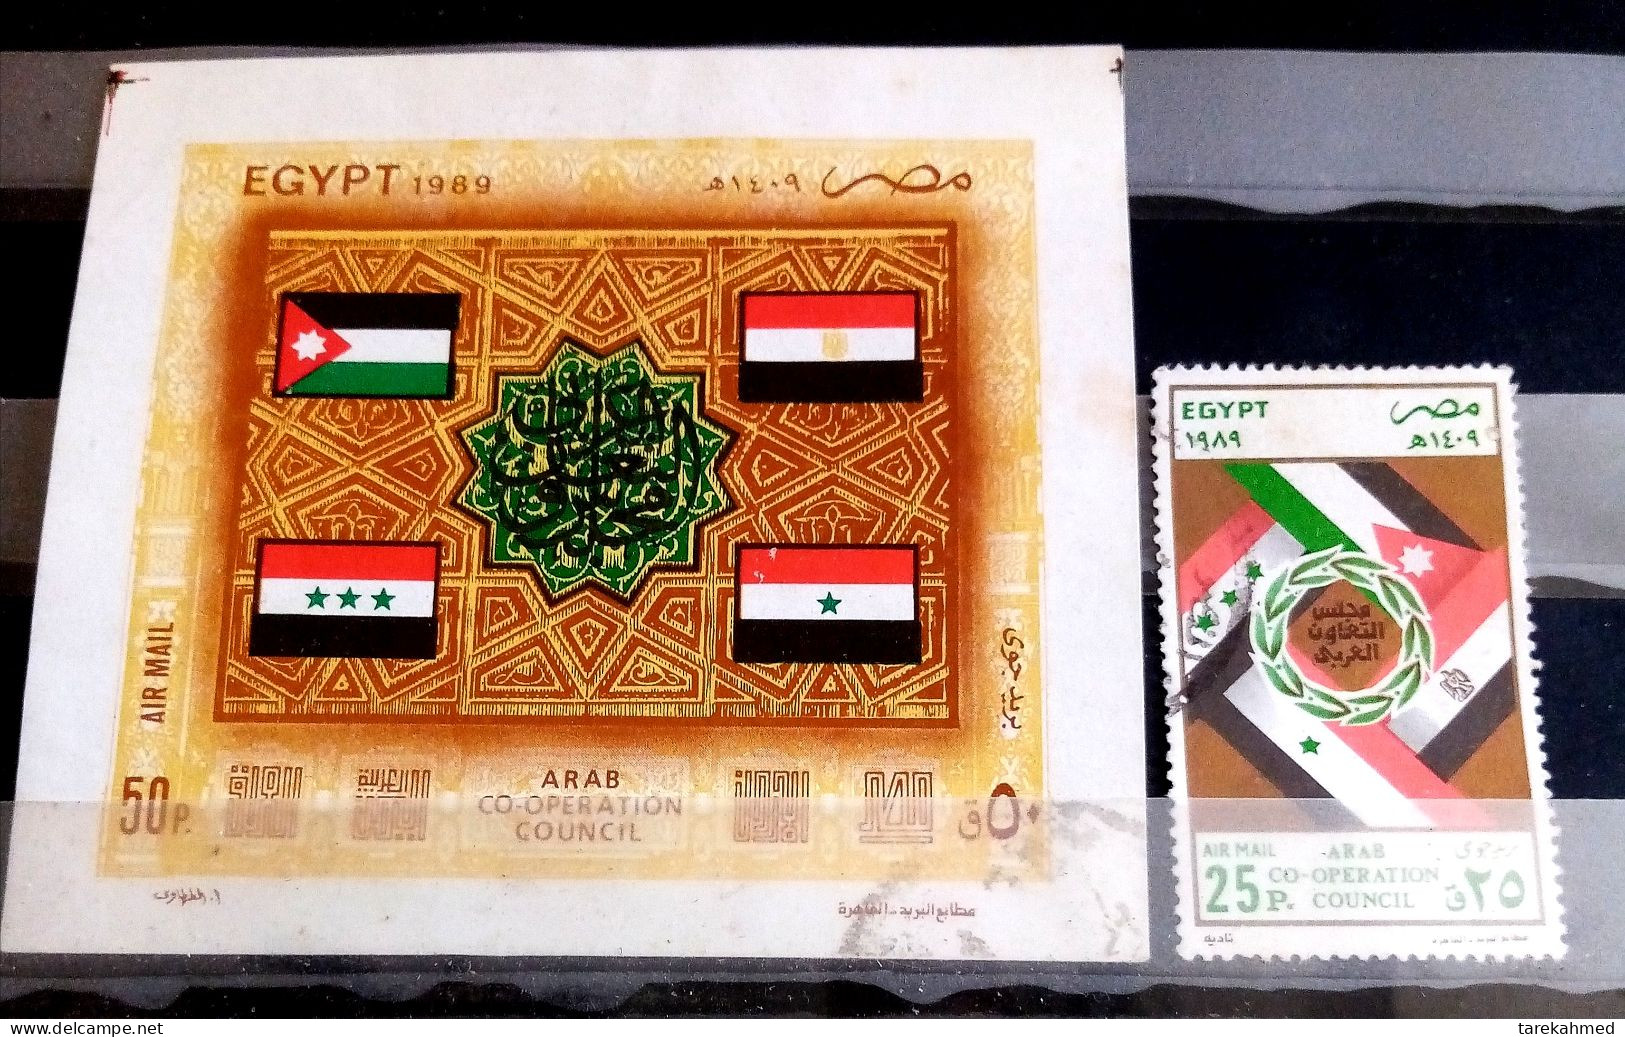 EGYPT 1989 , Complete SET, Stamp And S/S Of The ARAB CO-OPERATION COUNCIL, Flags, Airmail, MNH. - Ungebraucht